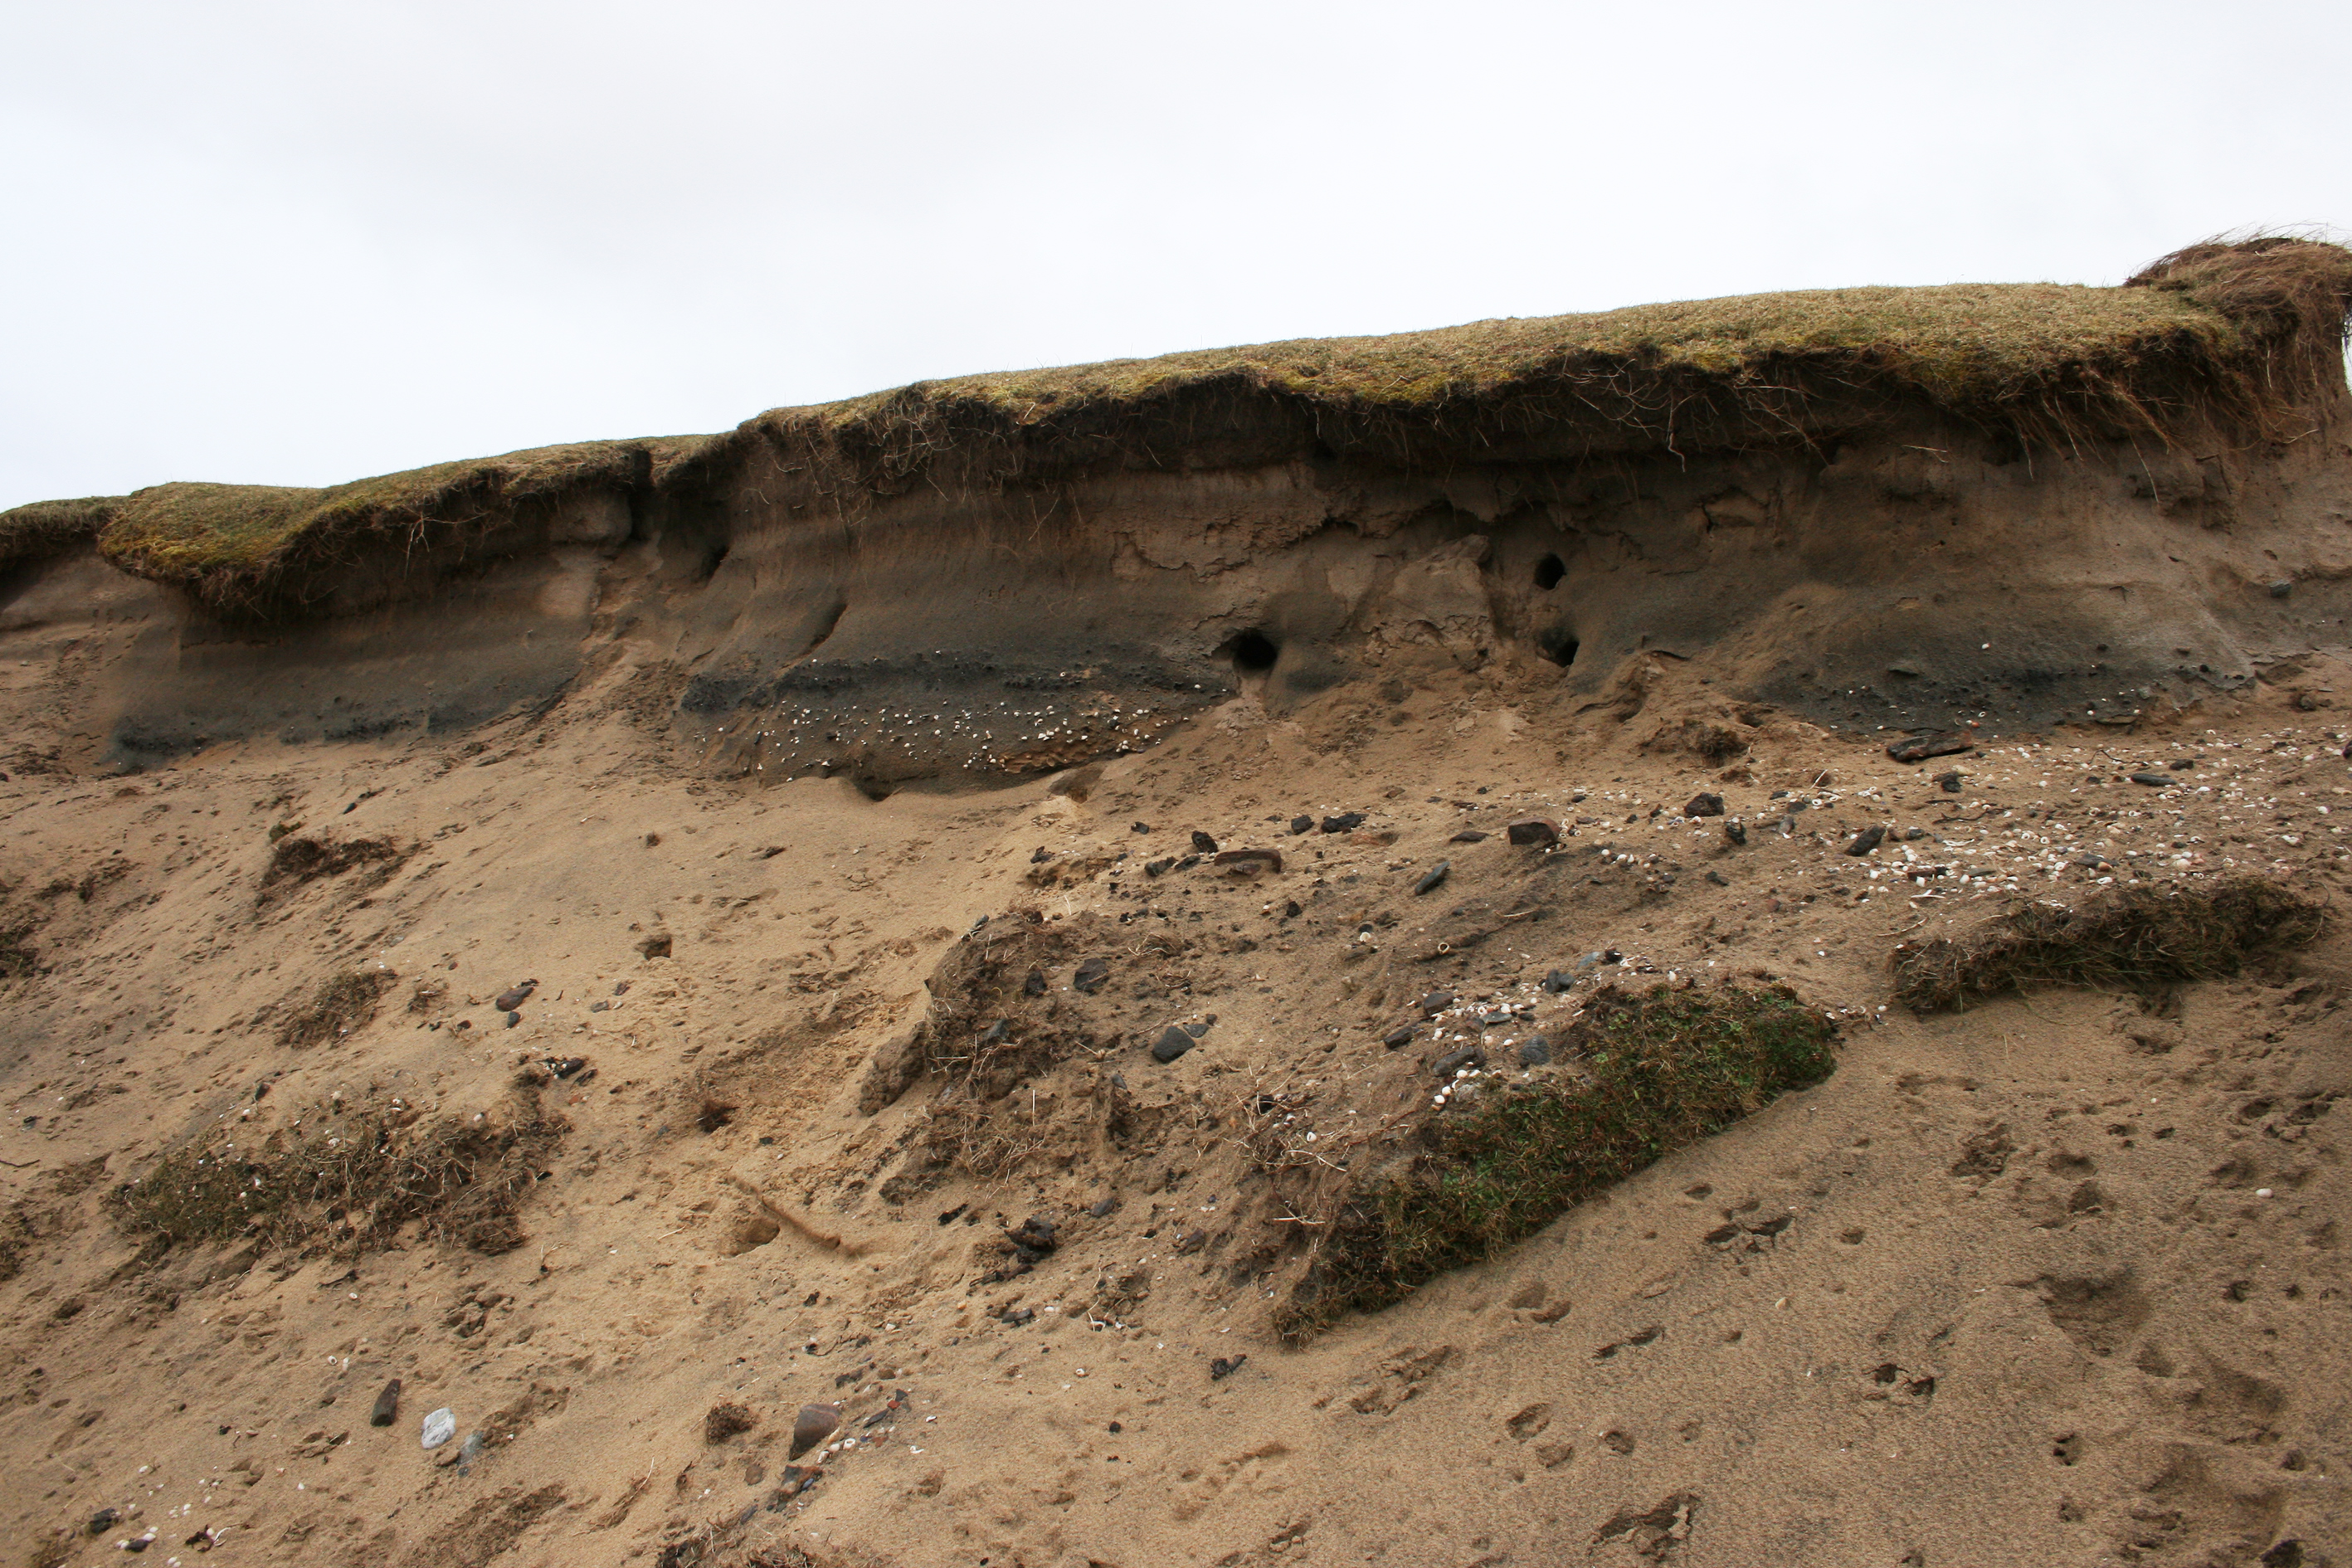 Closer view of section deposits. Fire-cracked stone in the foreground.